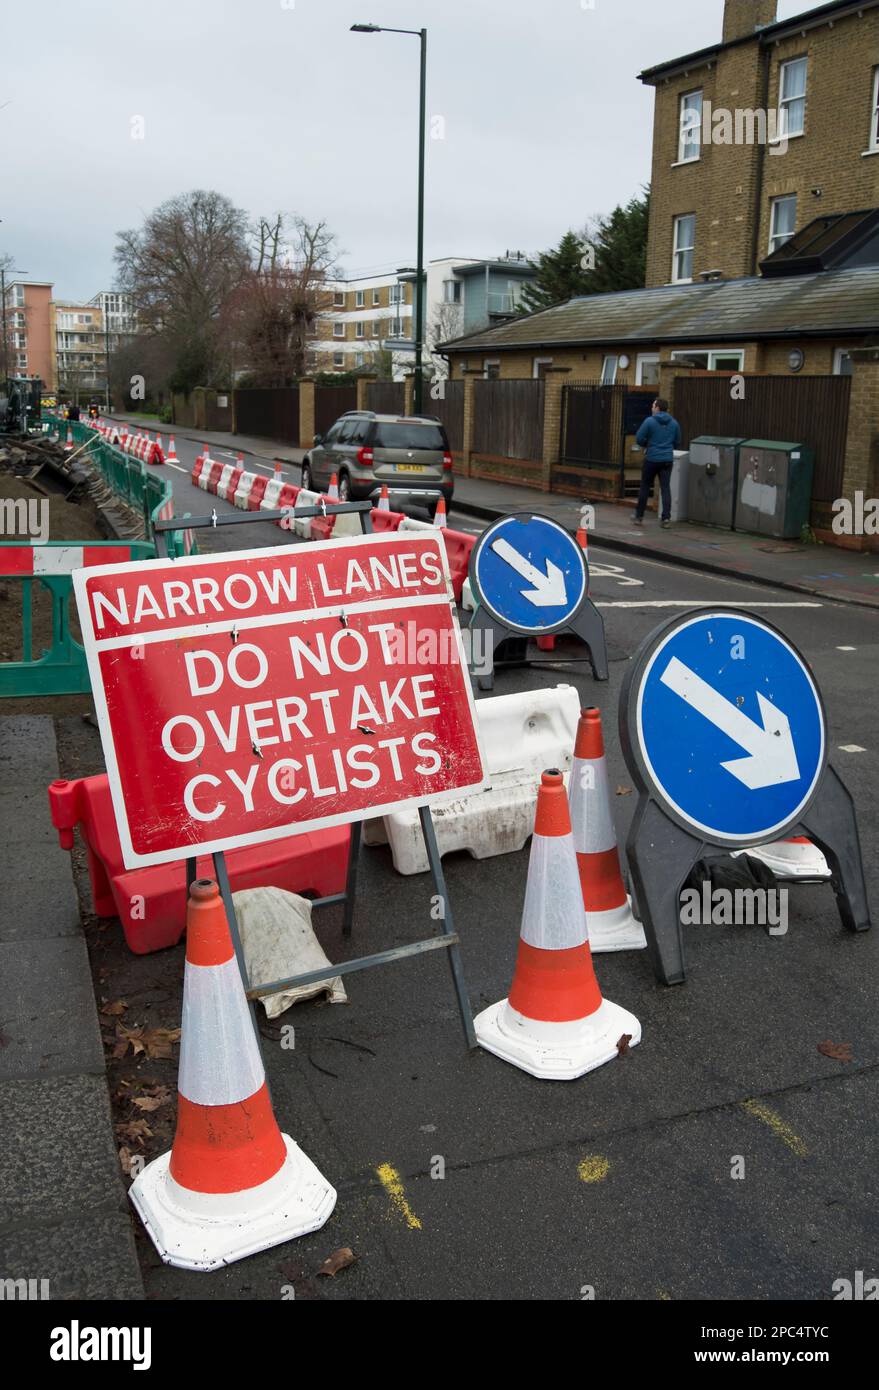 narrow lane do not overtake cyclists sign at road works in teddington, middlesex, england, beside cones and direction signs Stock Photo